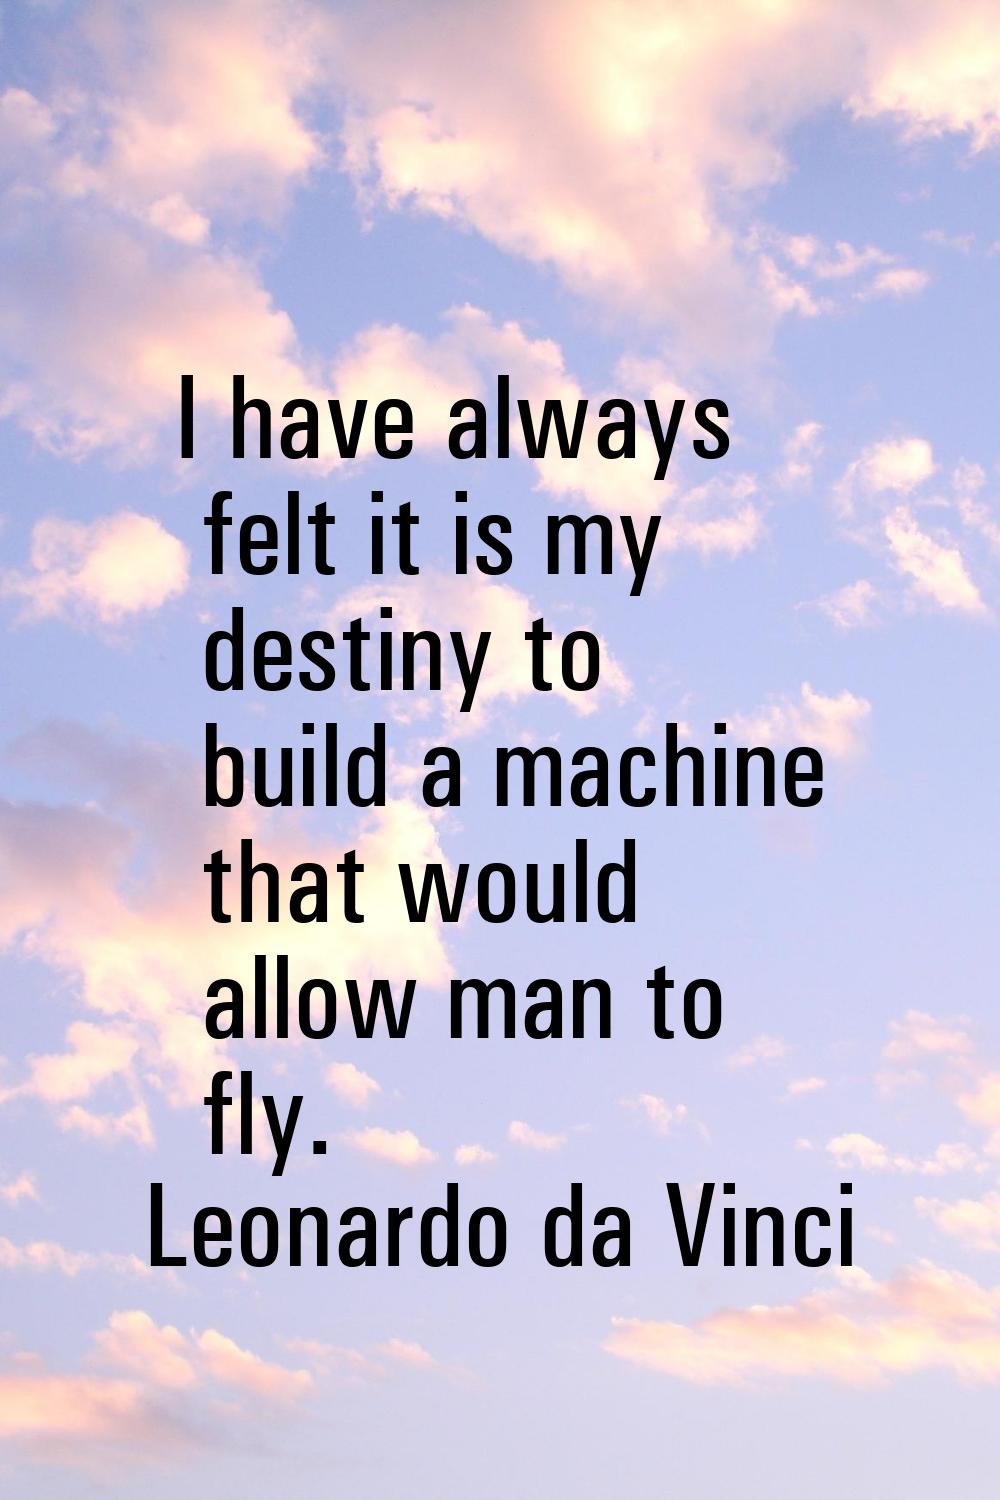 I have always felt it is my destiny to build a machine that would allow man to fly.